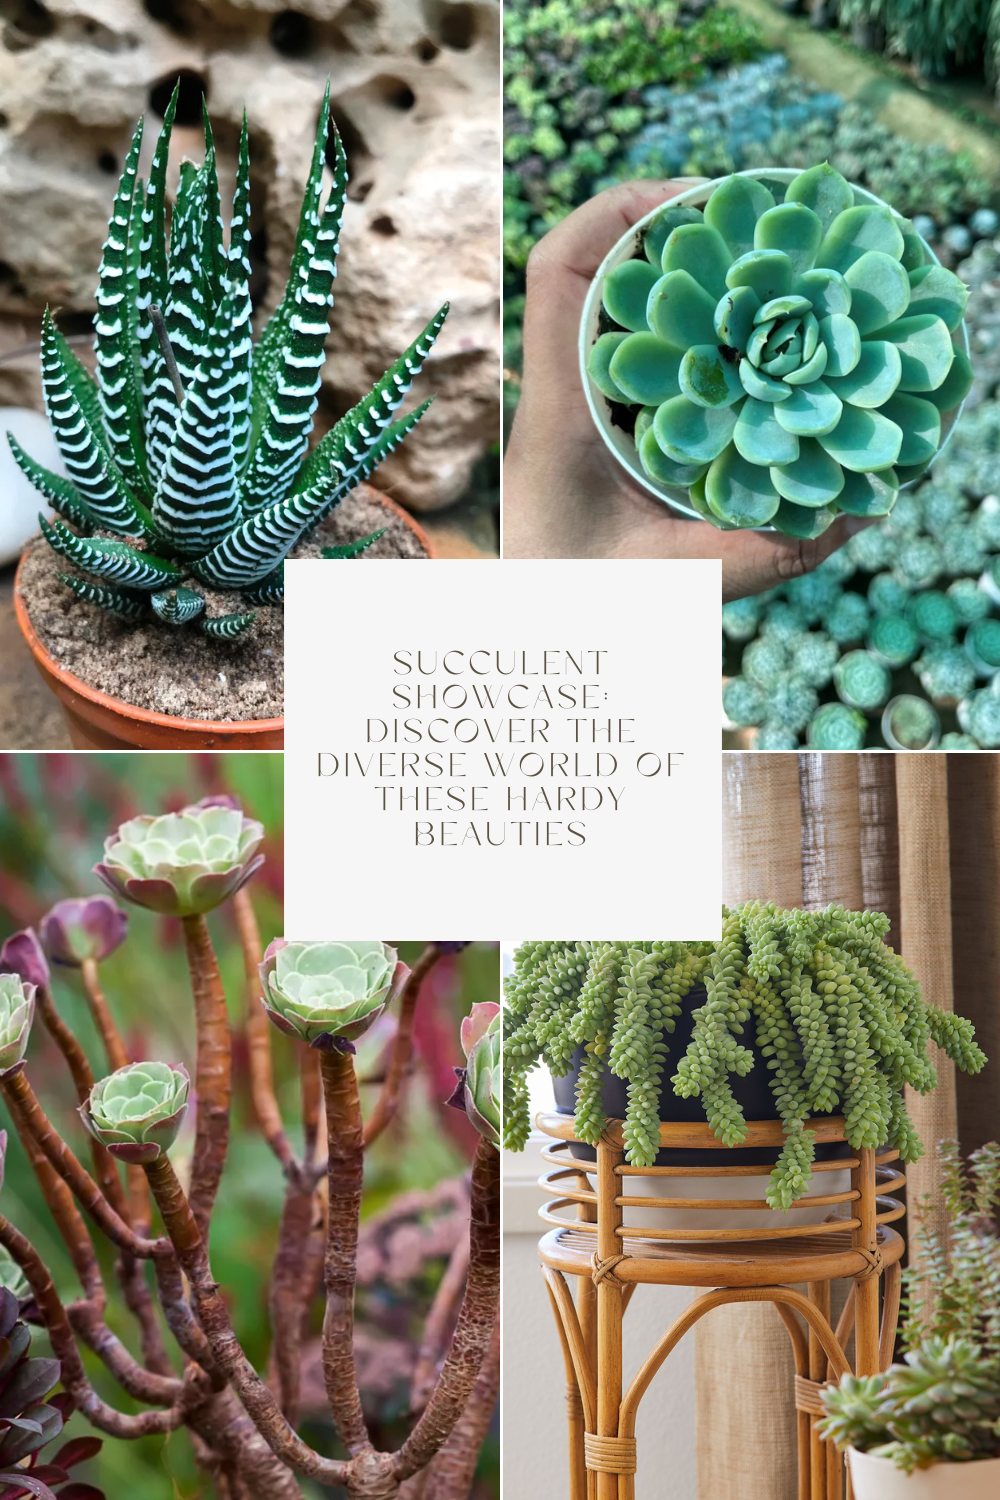 Succulent Showcase: Discover the Diverse World of These Hardy Beauties